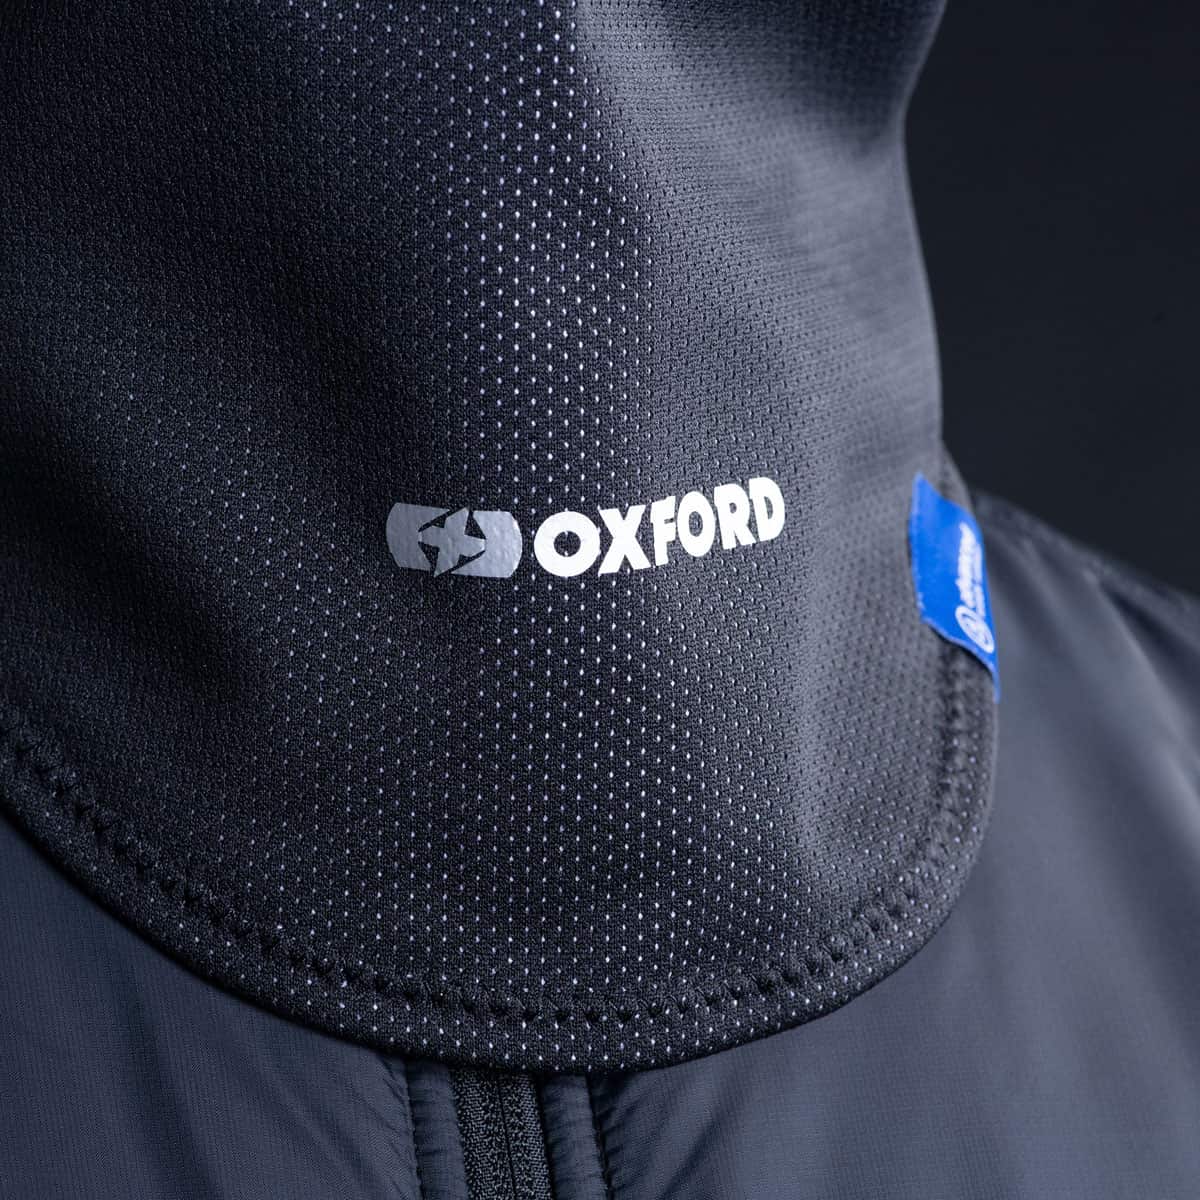 Oxford Advanced Storm Collar: A waterproof thermal baselayer